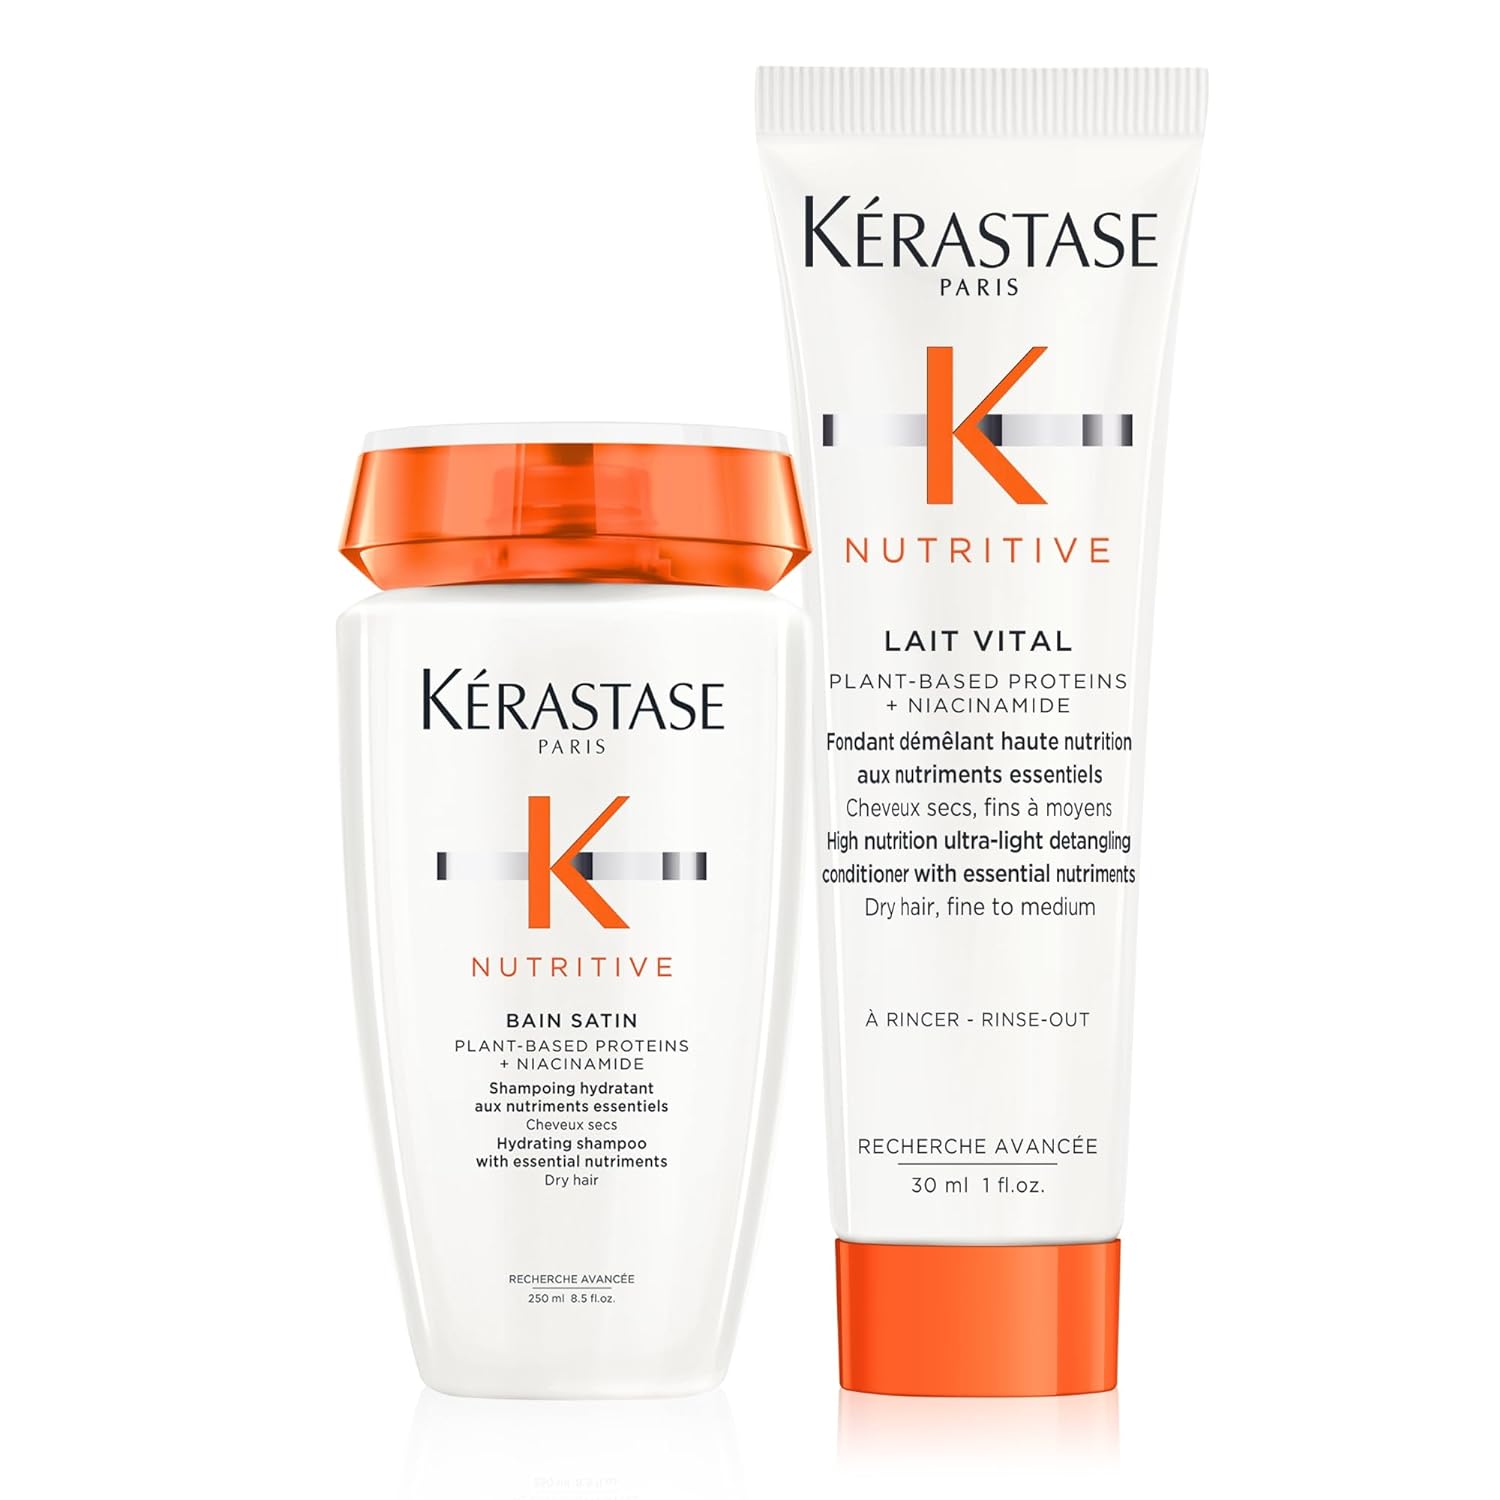 KERASTASE Nutritive Bain Satin Shampoo  Lait Vital Conditioner Set | Gently Cleanses  Replenishes Moisture | With Plant-Based Proteins  Niacinamide | For Fine to Medium Dry Hair | 8.5 Fl Oz